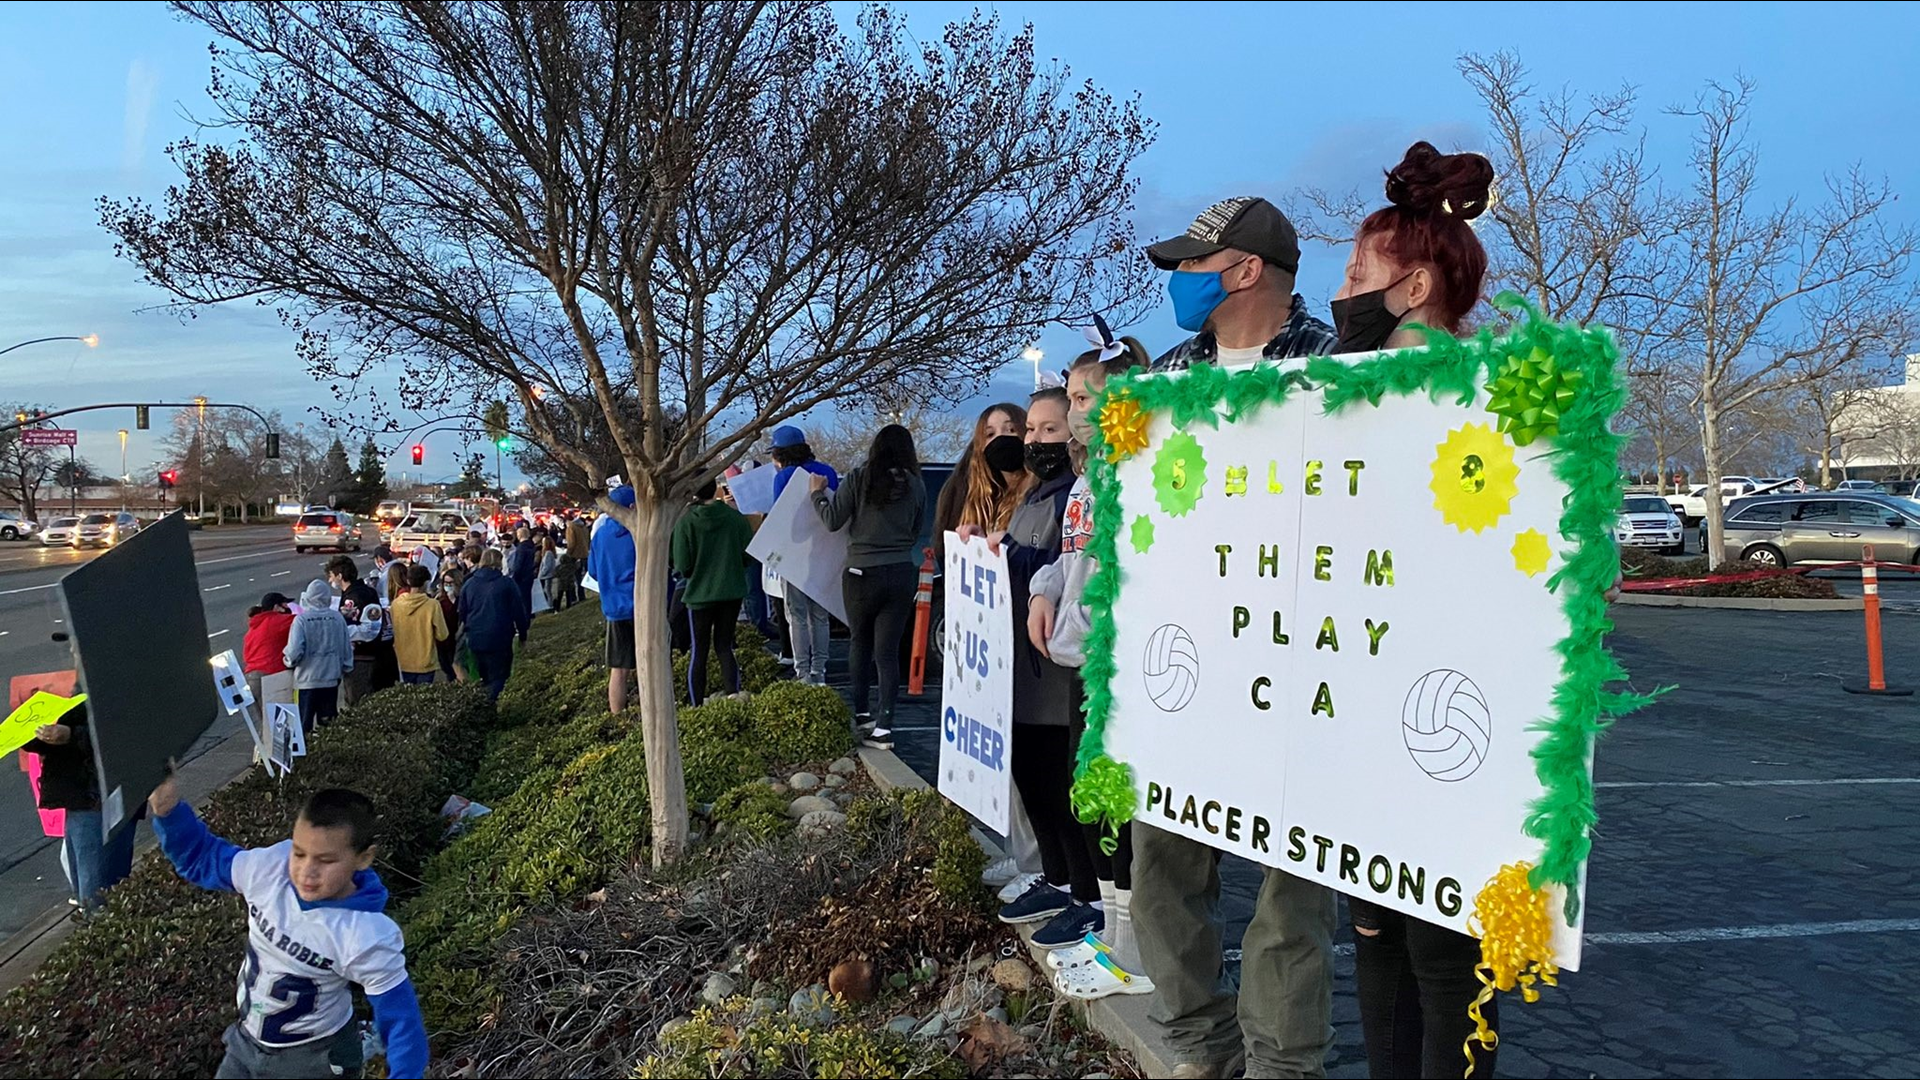 Hundreds rallied in Citrus Heights, Friday, calling on government leaders to allow youth sports to resume in California.